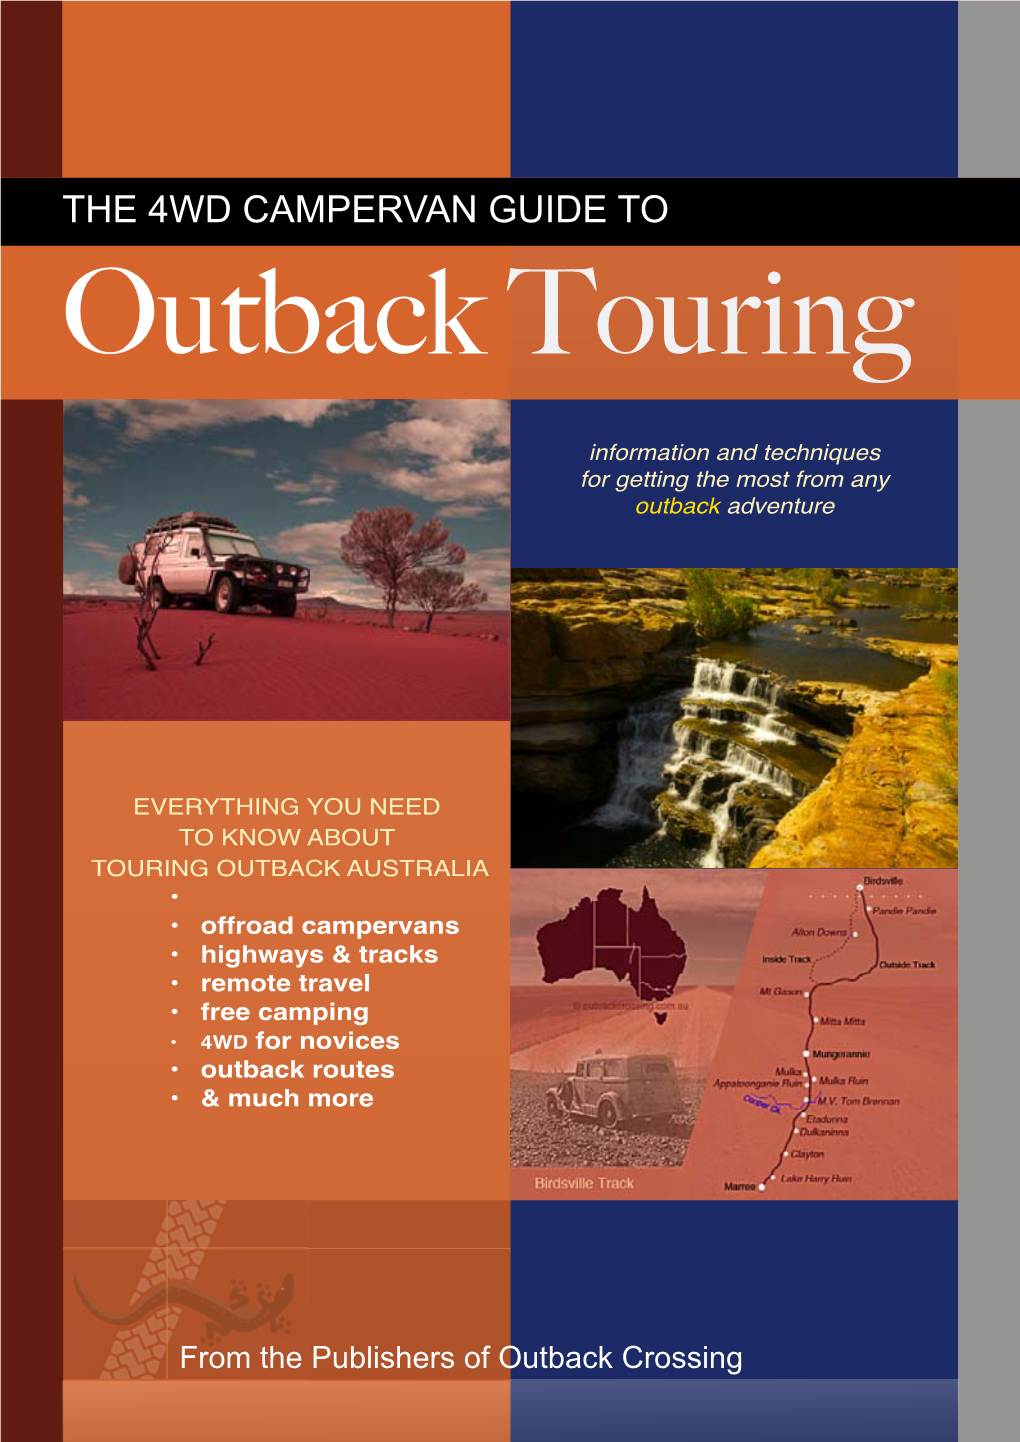 THE 4WD CAMPERVAN GUIDE to Outback Touring